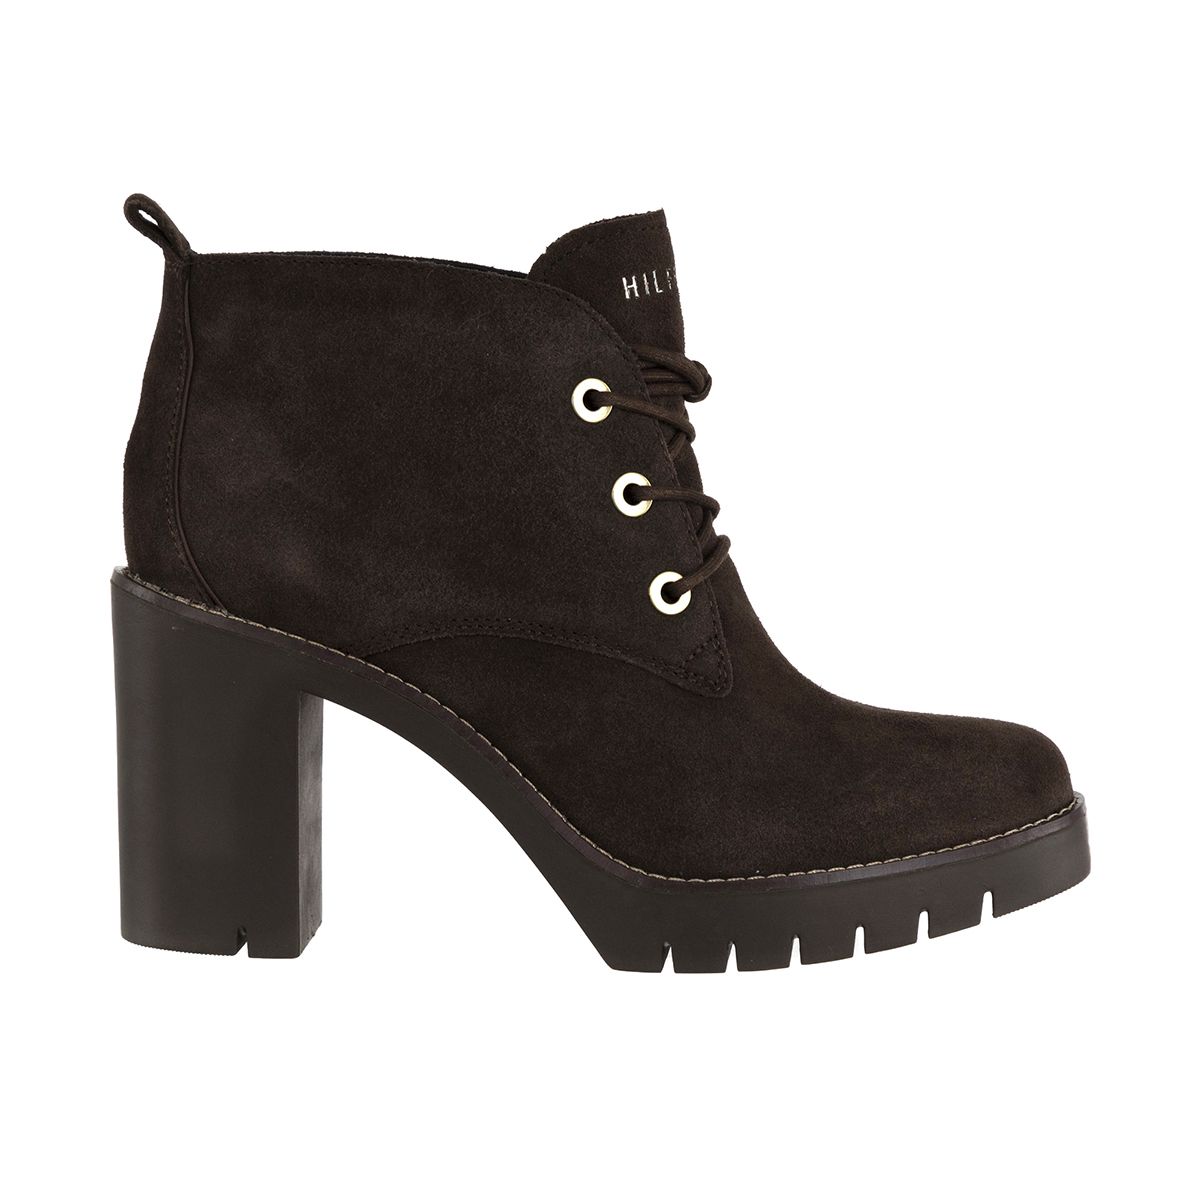 Tommy Hilfiger FW0FW01541-211-41 Ankle Boots